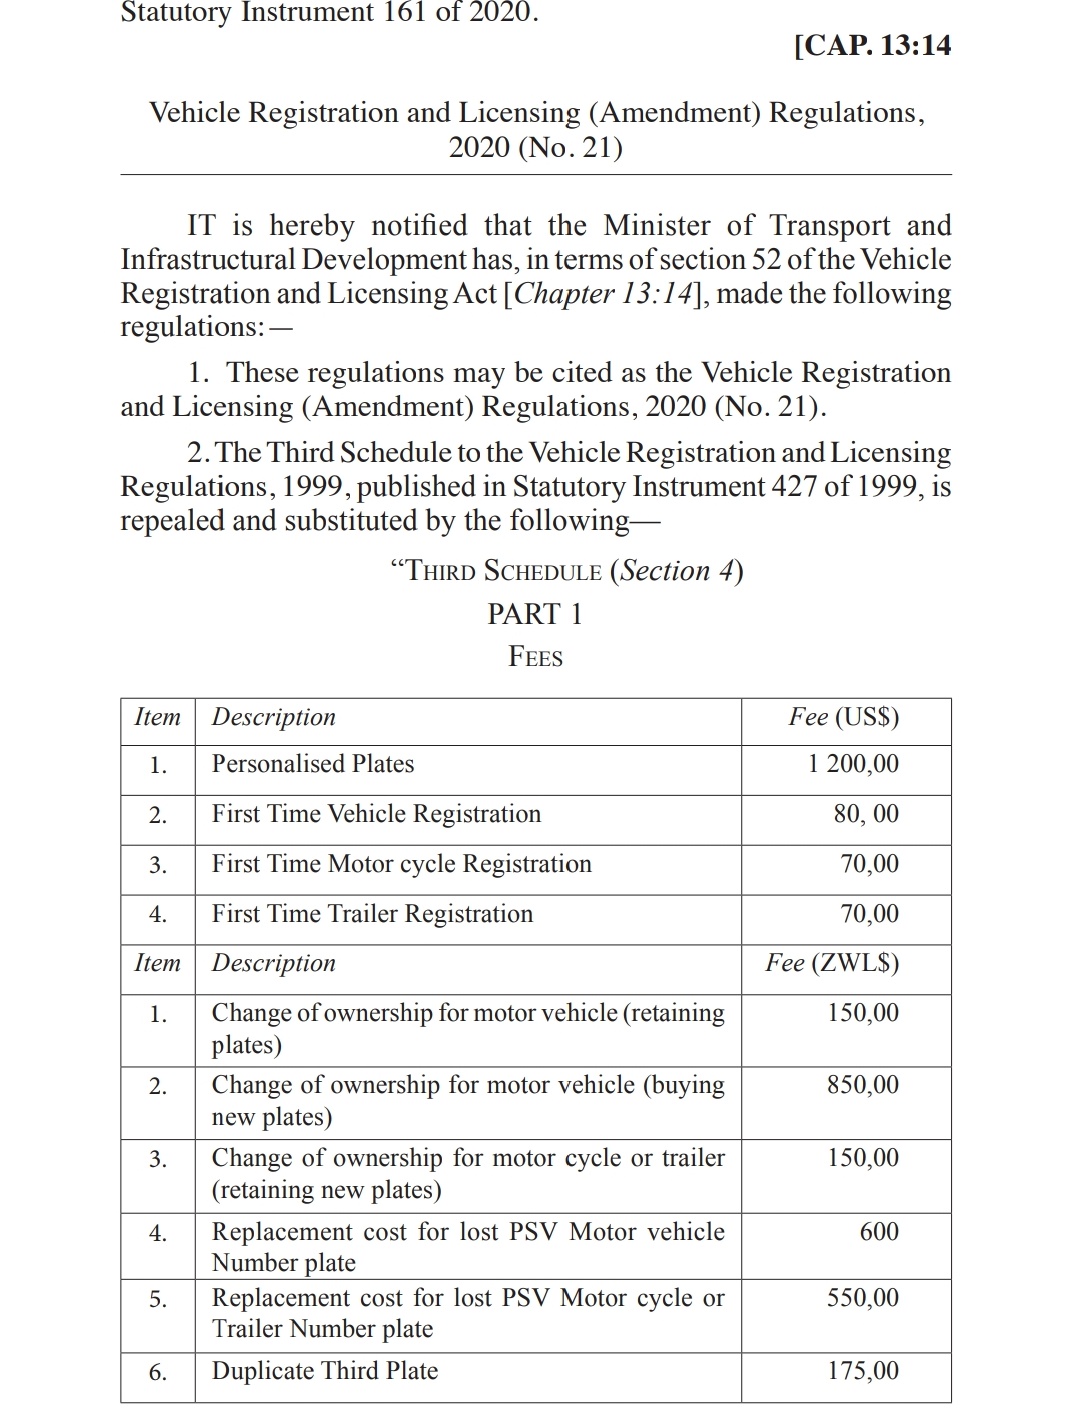 Vehicle Registration and Licencing Fees In Zimbabwe